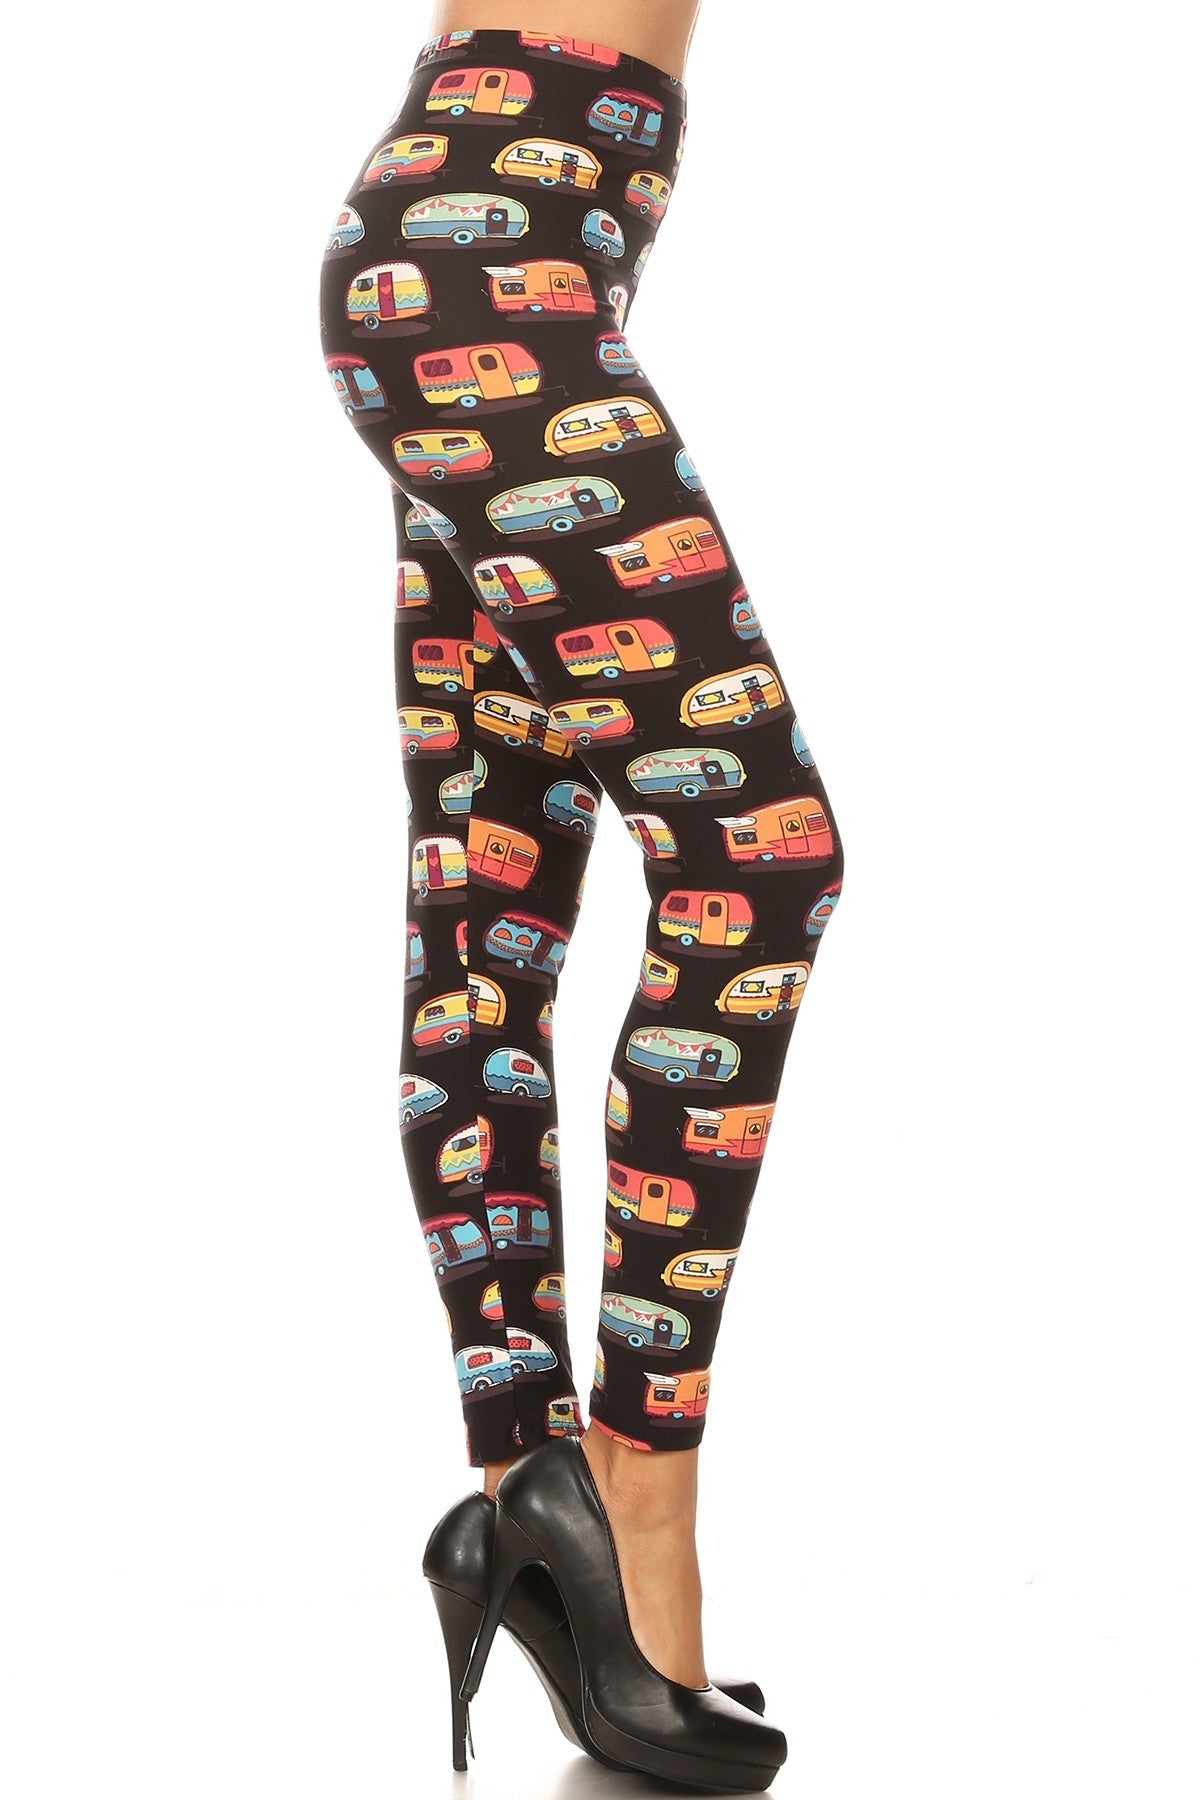 Campers Printed High Waisted Leggings king-general-store-5710.myshopify.com